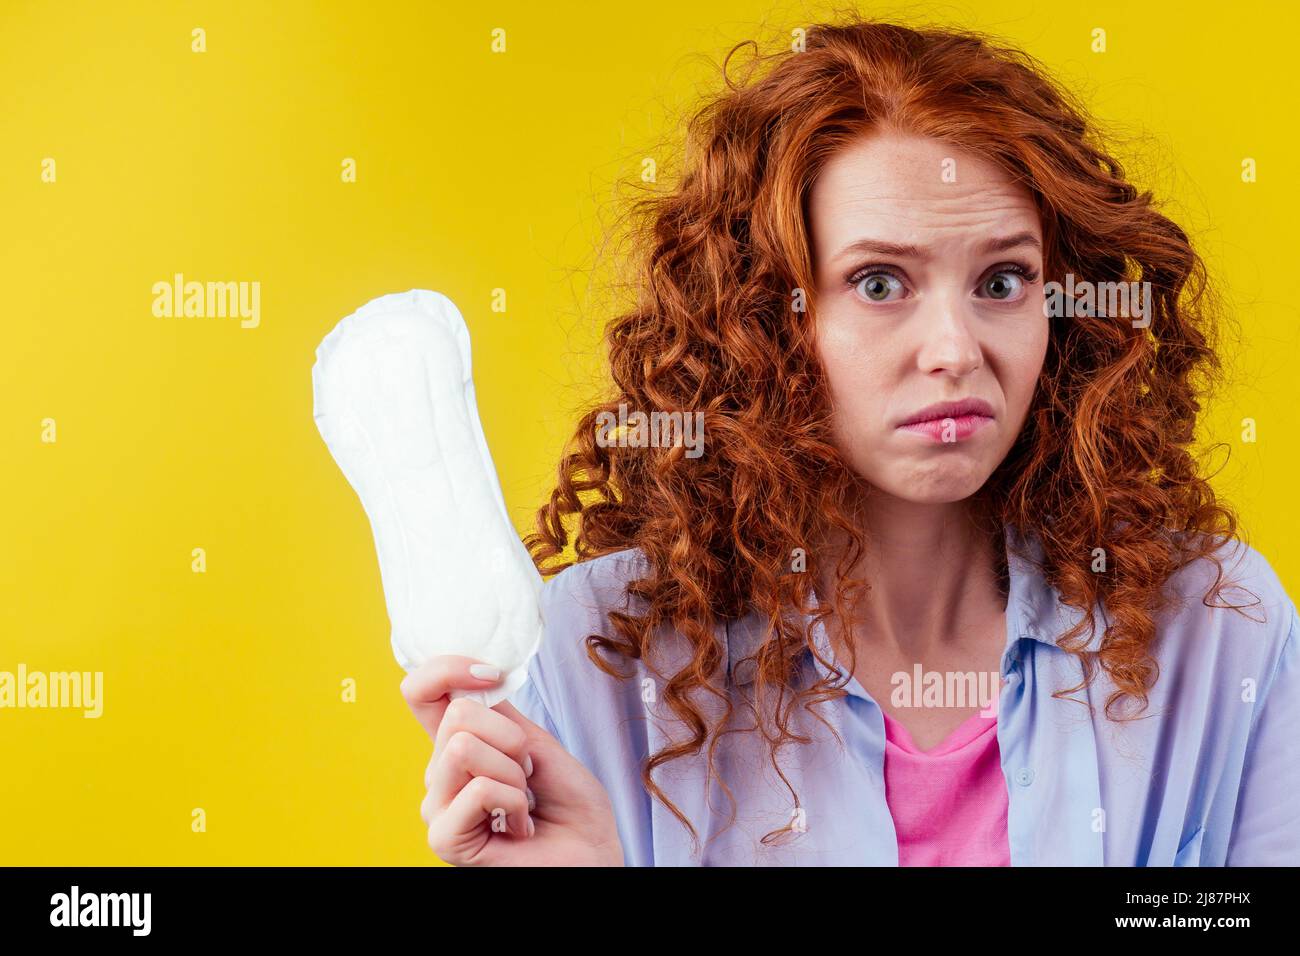 embarrassment redhaired ginger curly woman looking shyness and holding sanitary pads in studio yellow background Stock Photo